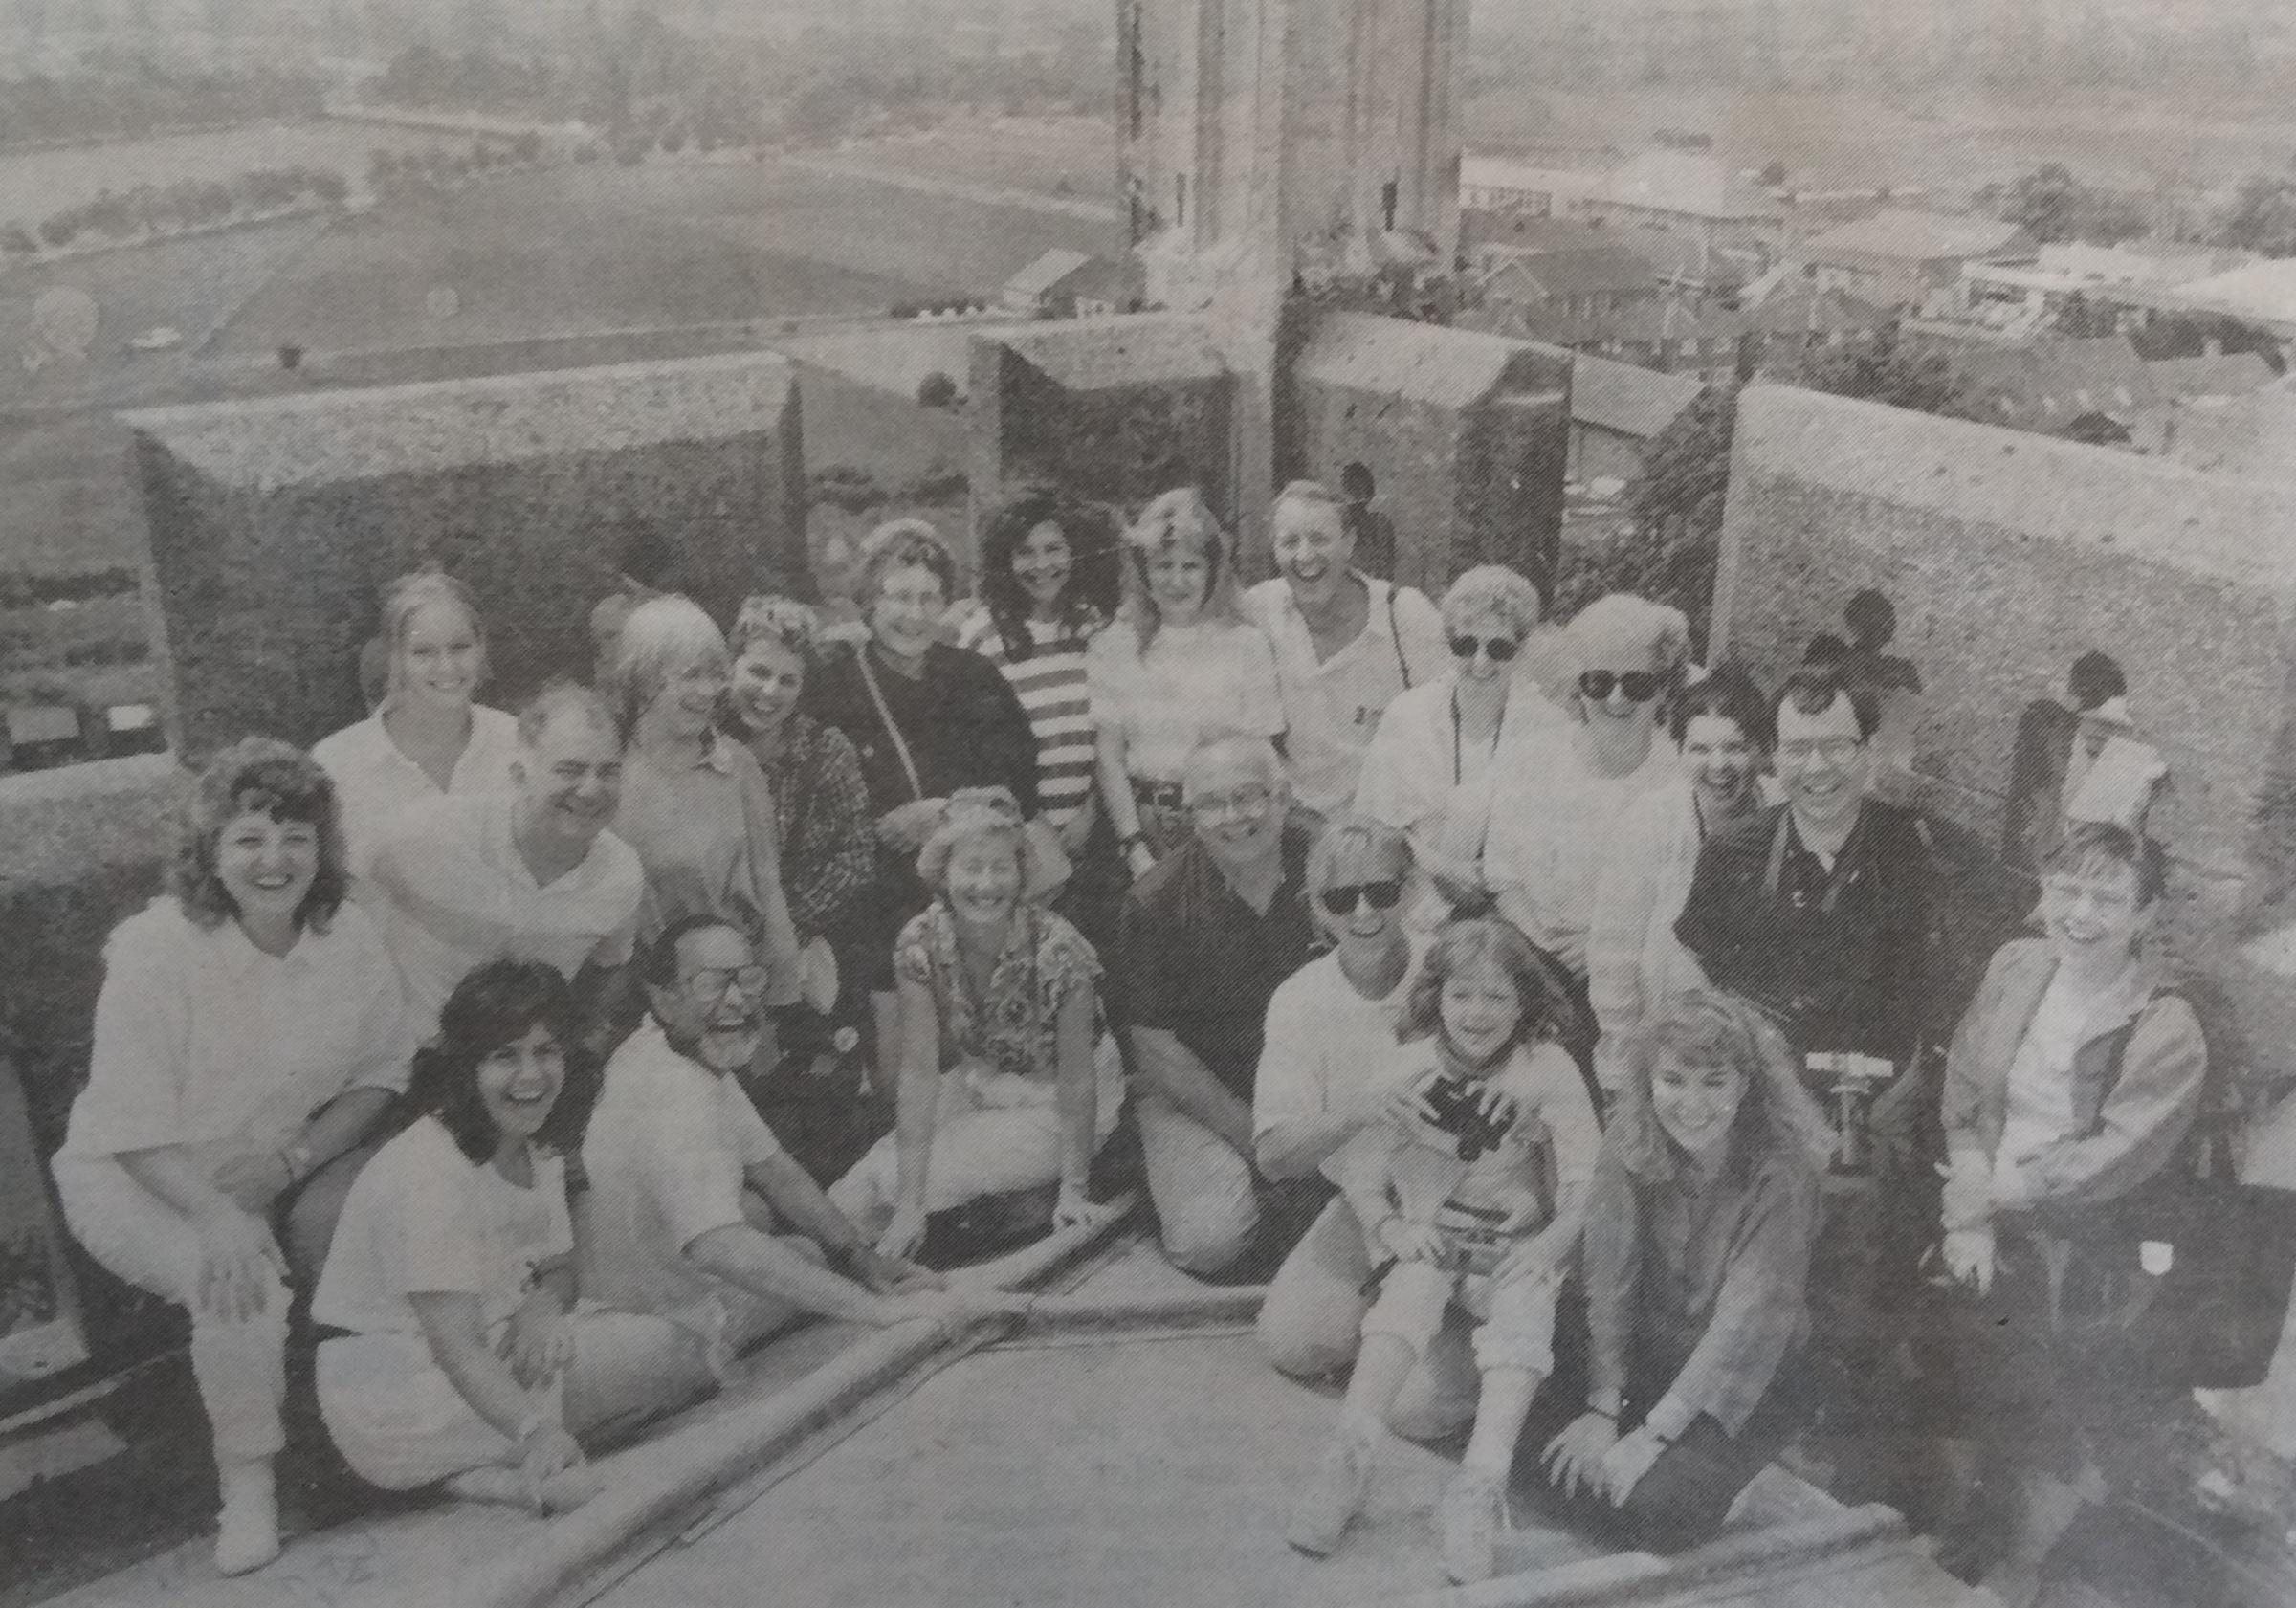 July 1989 and a group of 25 Americans from the US township of Evesham, New Jersey were in Worcestershire